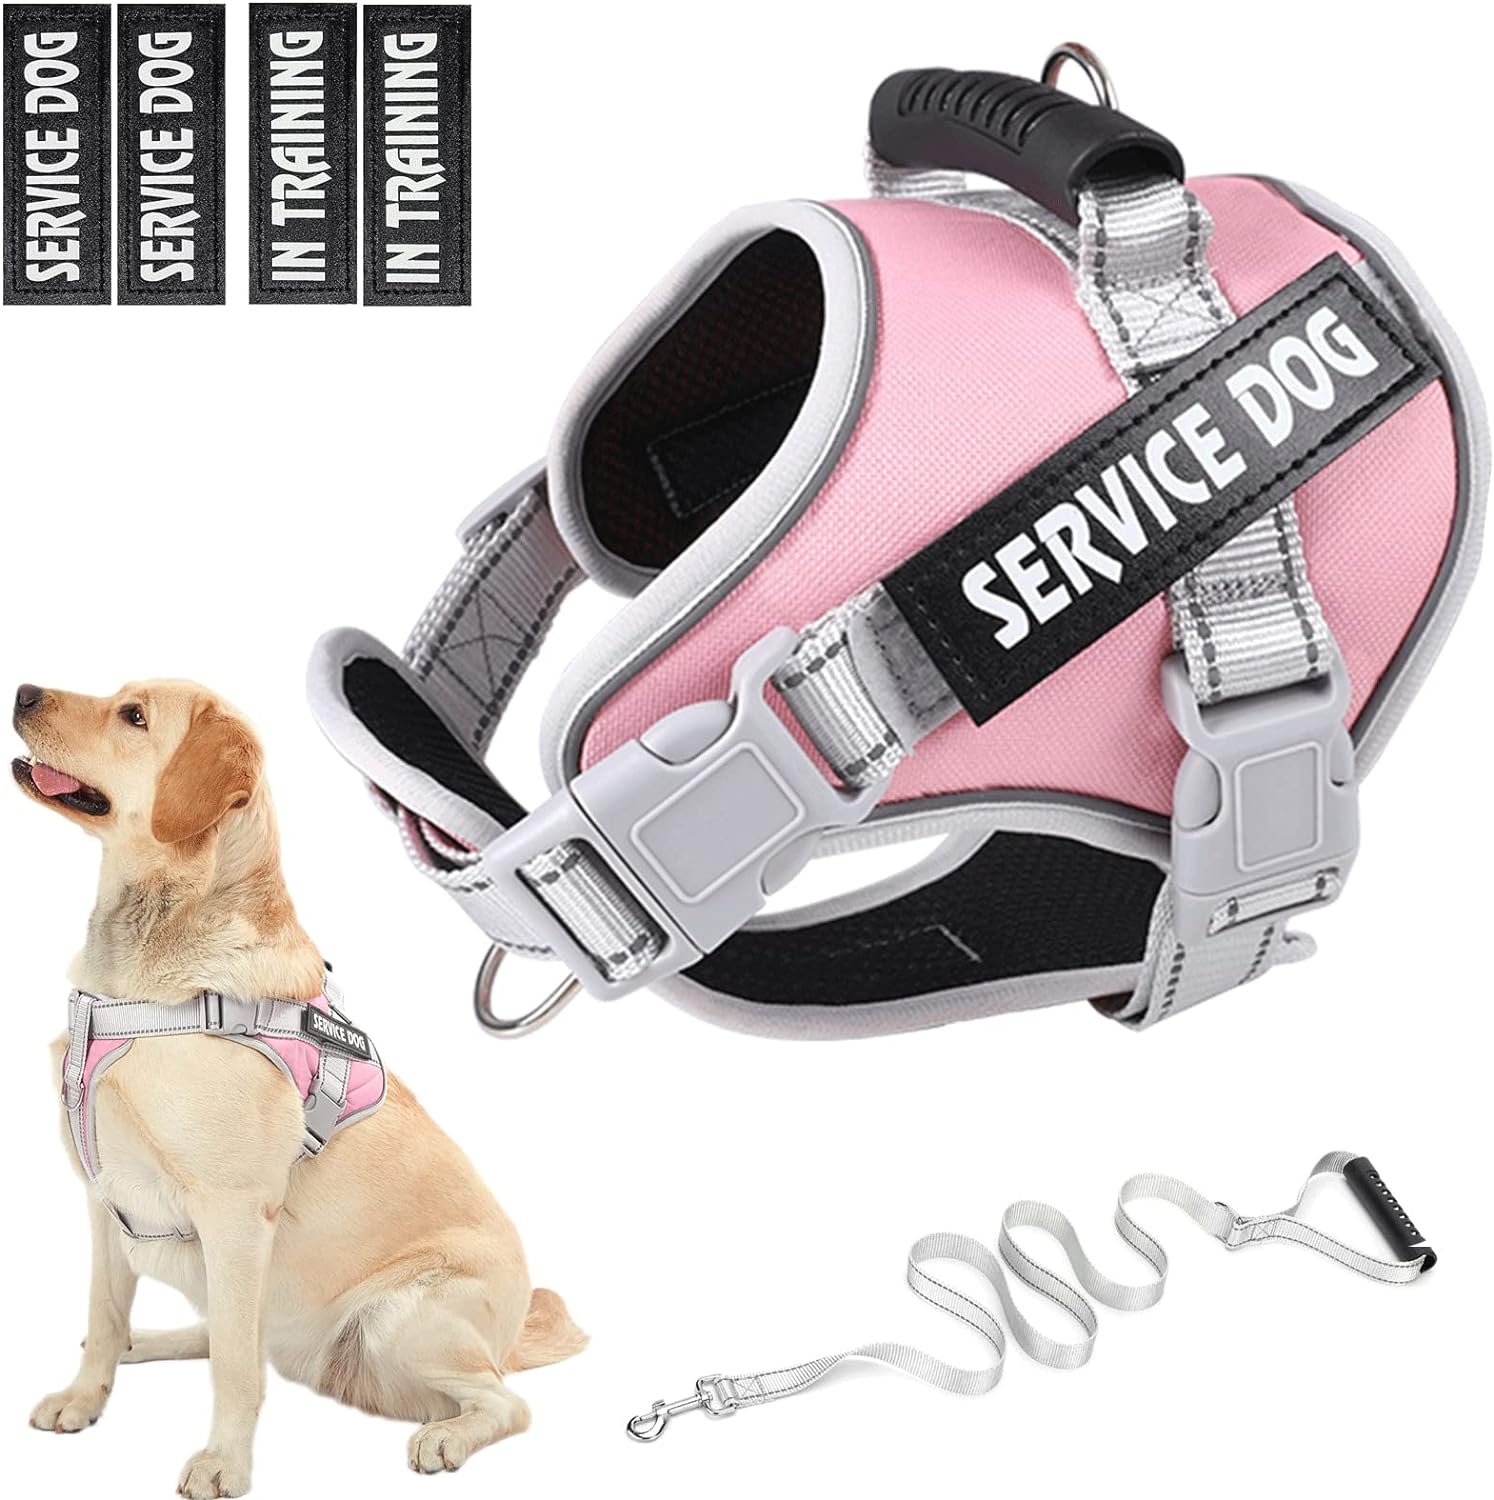 HUSDOW Service Dog Vest Harness, No Pull in Trainning Dog Harnesses with Handle  5ft Dog Leash, Adjustable and Reflective No Chock for Small Medum Large Pets Walking and Running(Pink, S)